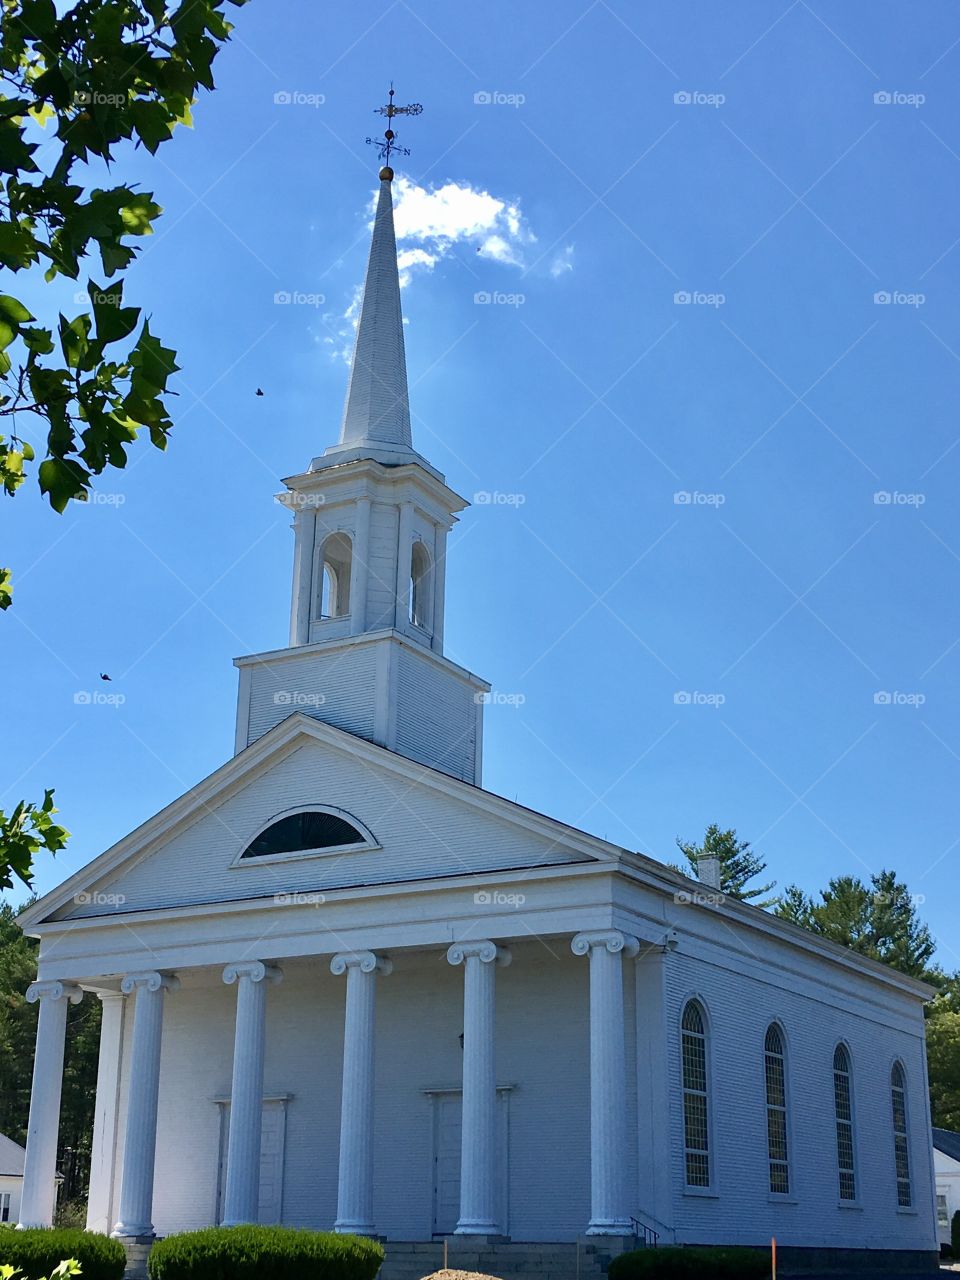 First 1st Congregational Church in New England.